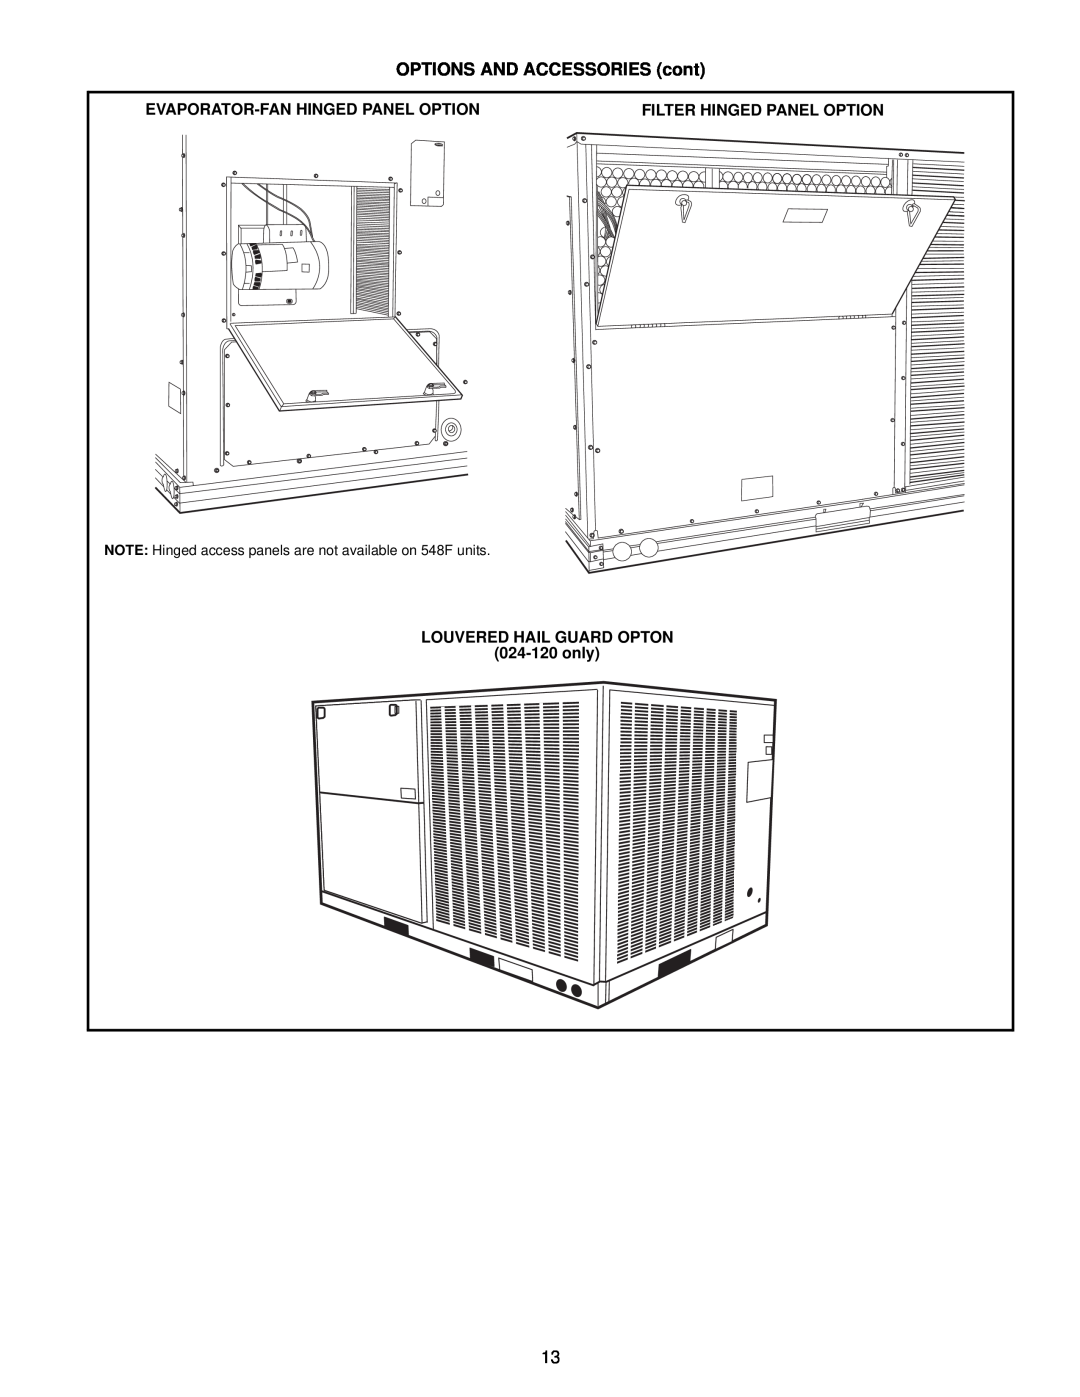 Bryant 549C manual Evaporator-Fanhinged Panel Option, Filter Hinged Panel Option, Louvered Hail Guard Opton, 024-120only 